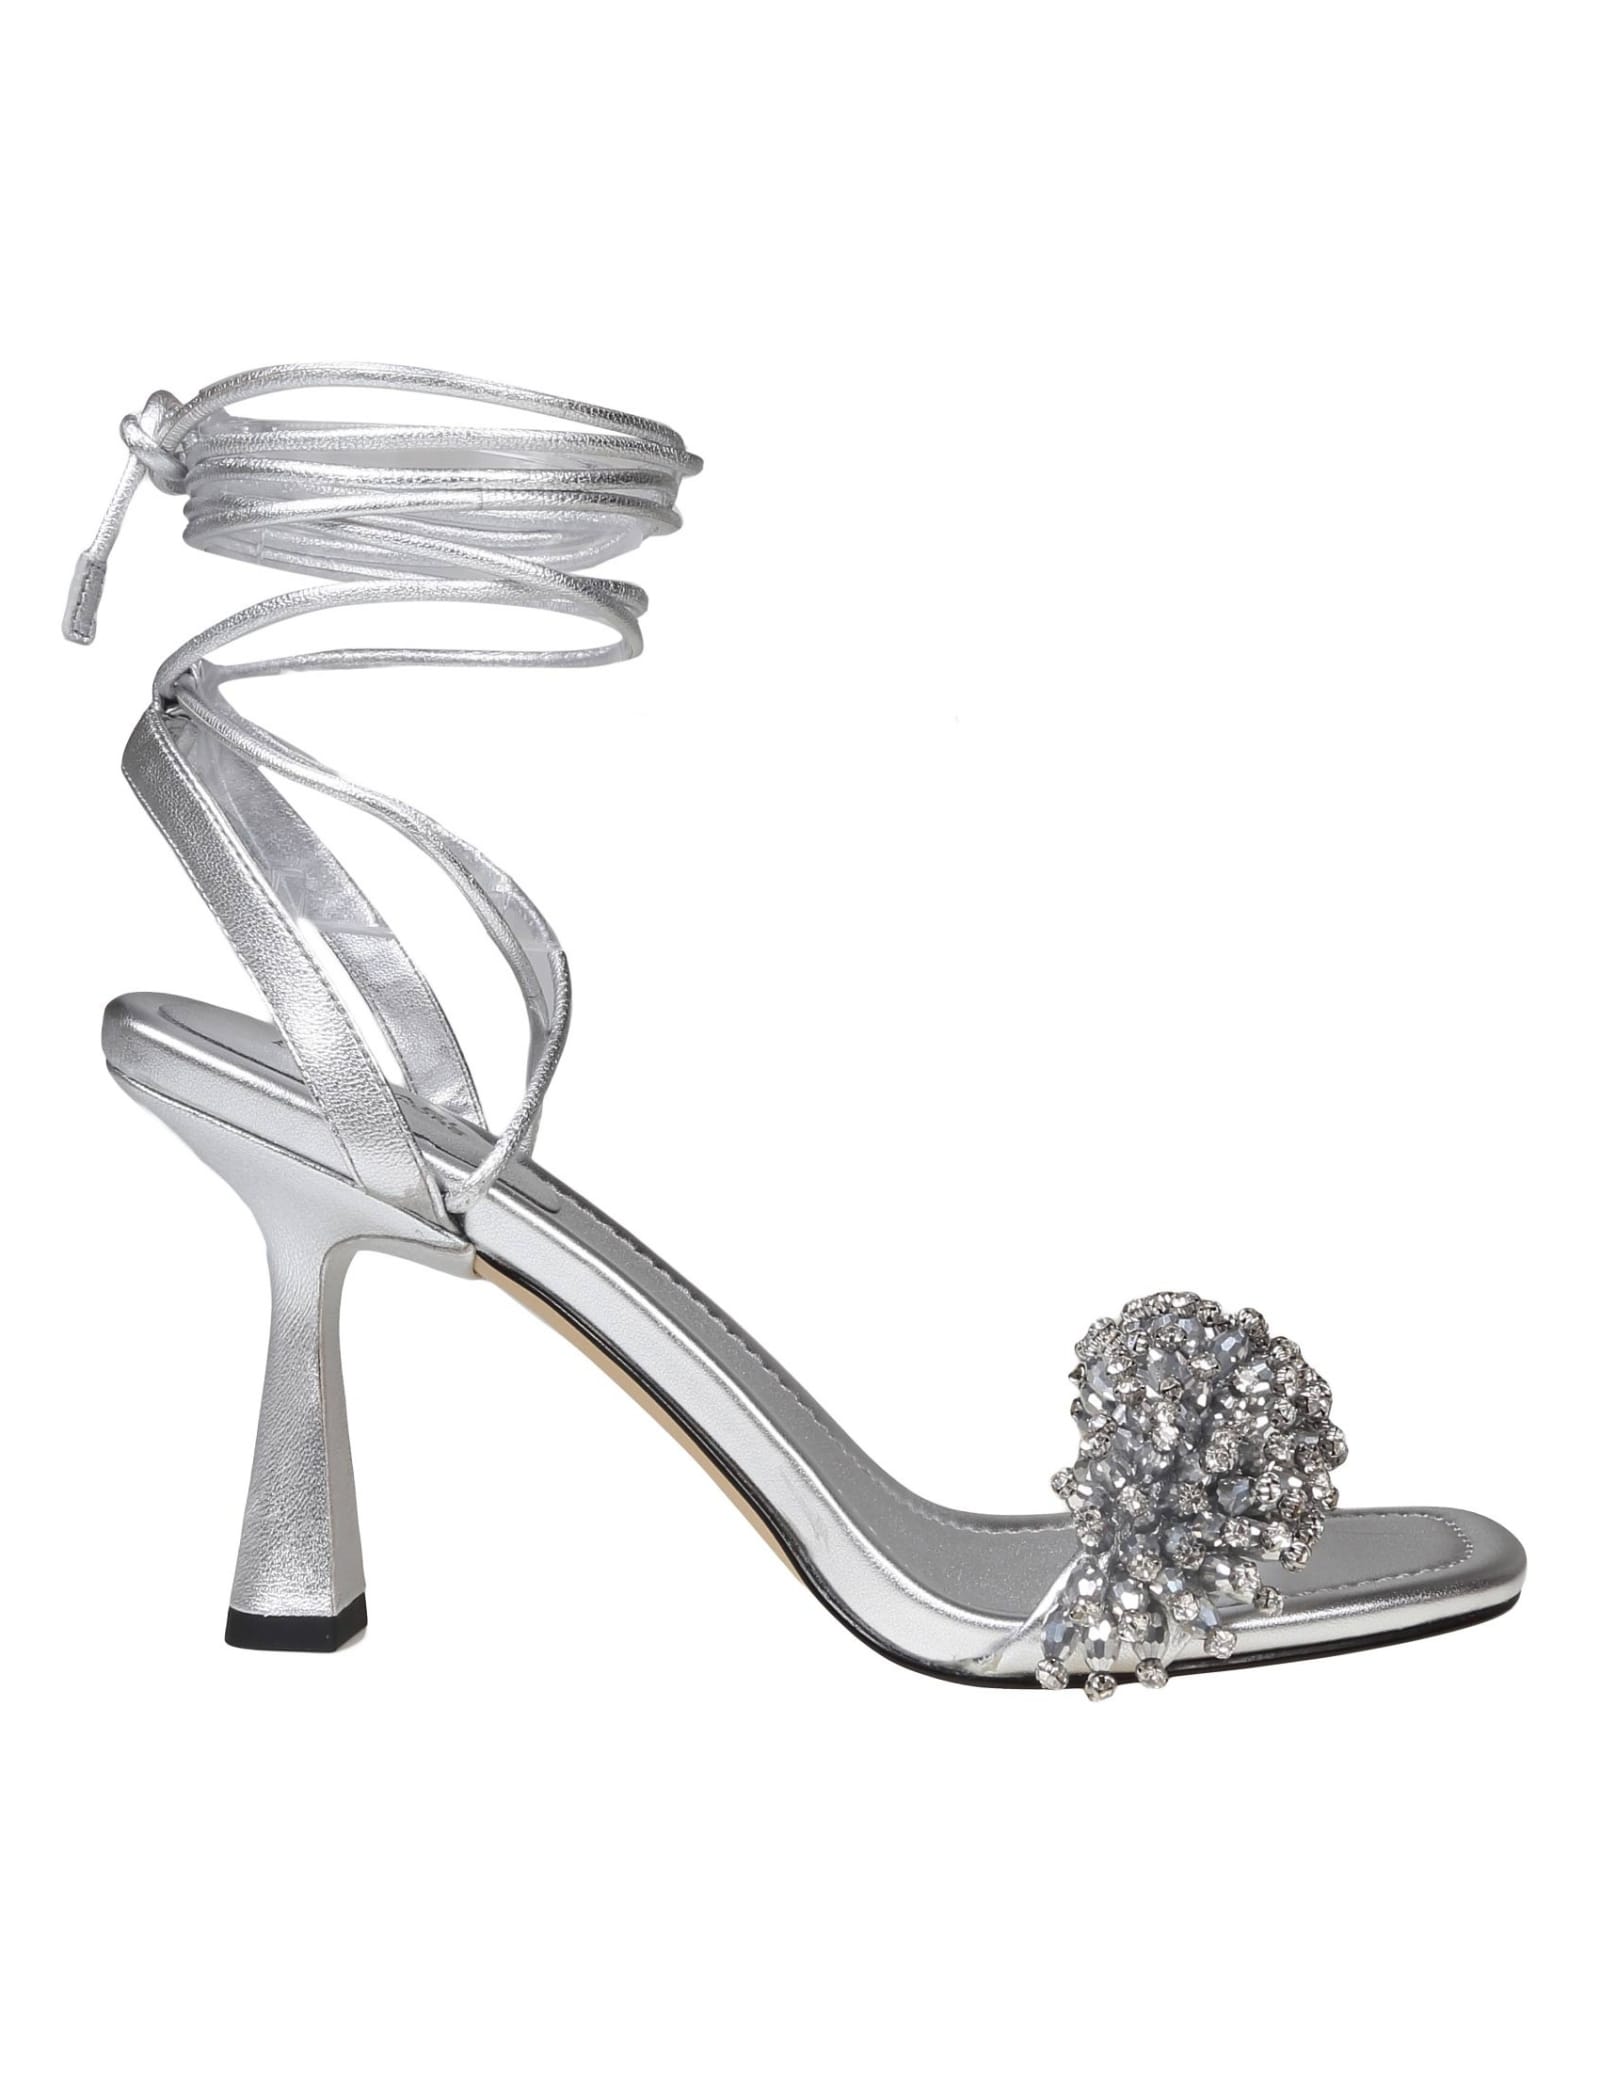 Michael Kors Lucia Sandal In Silver Leather